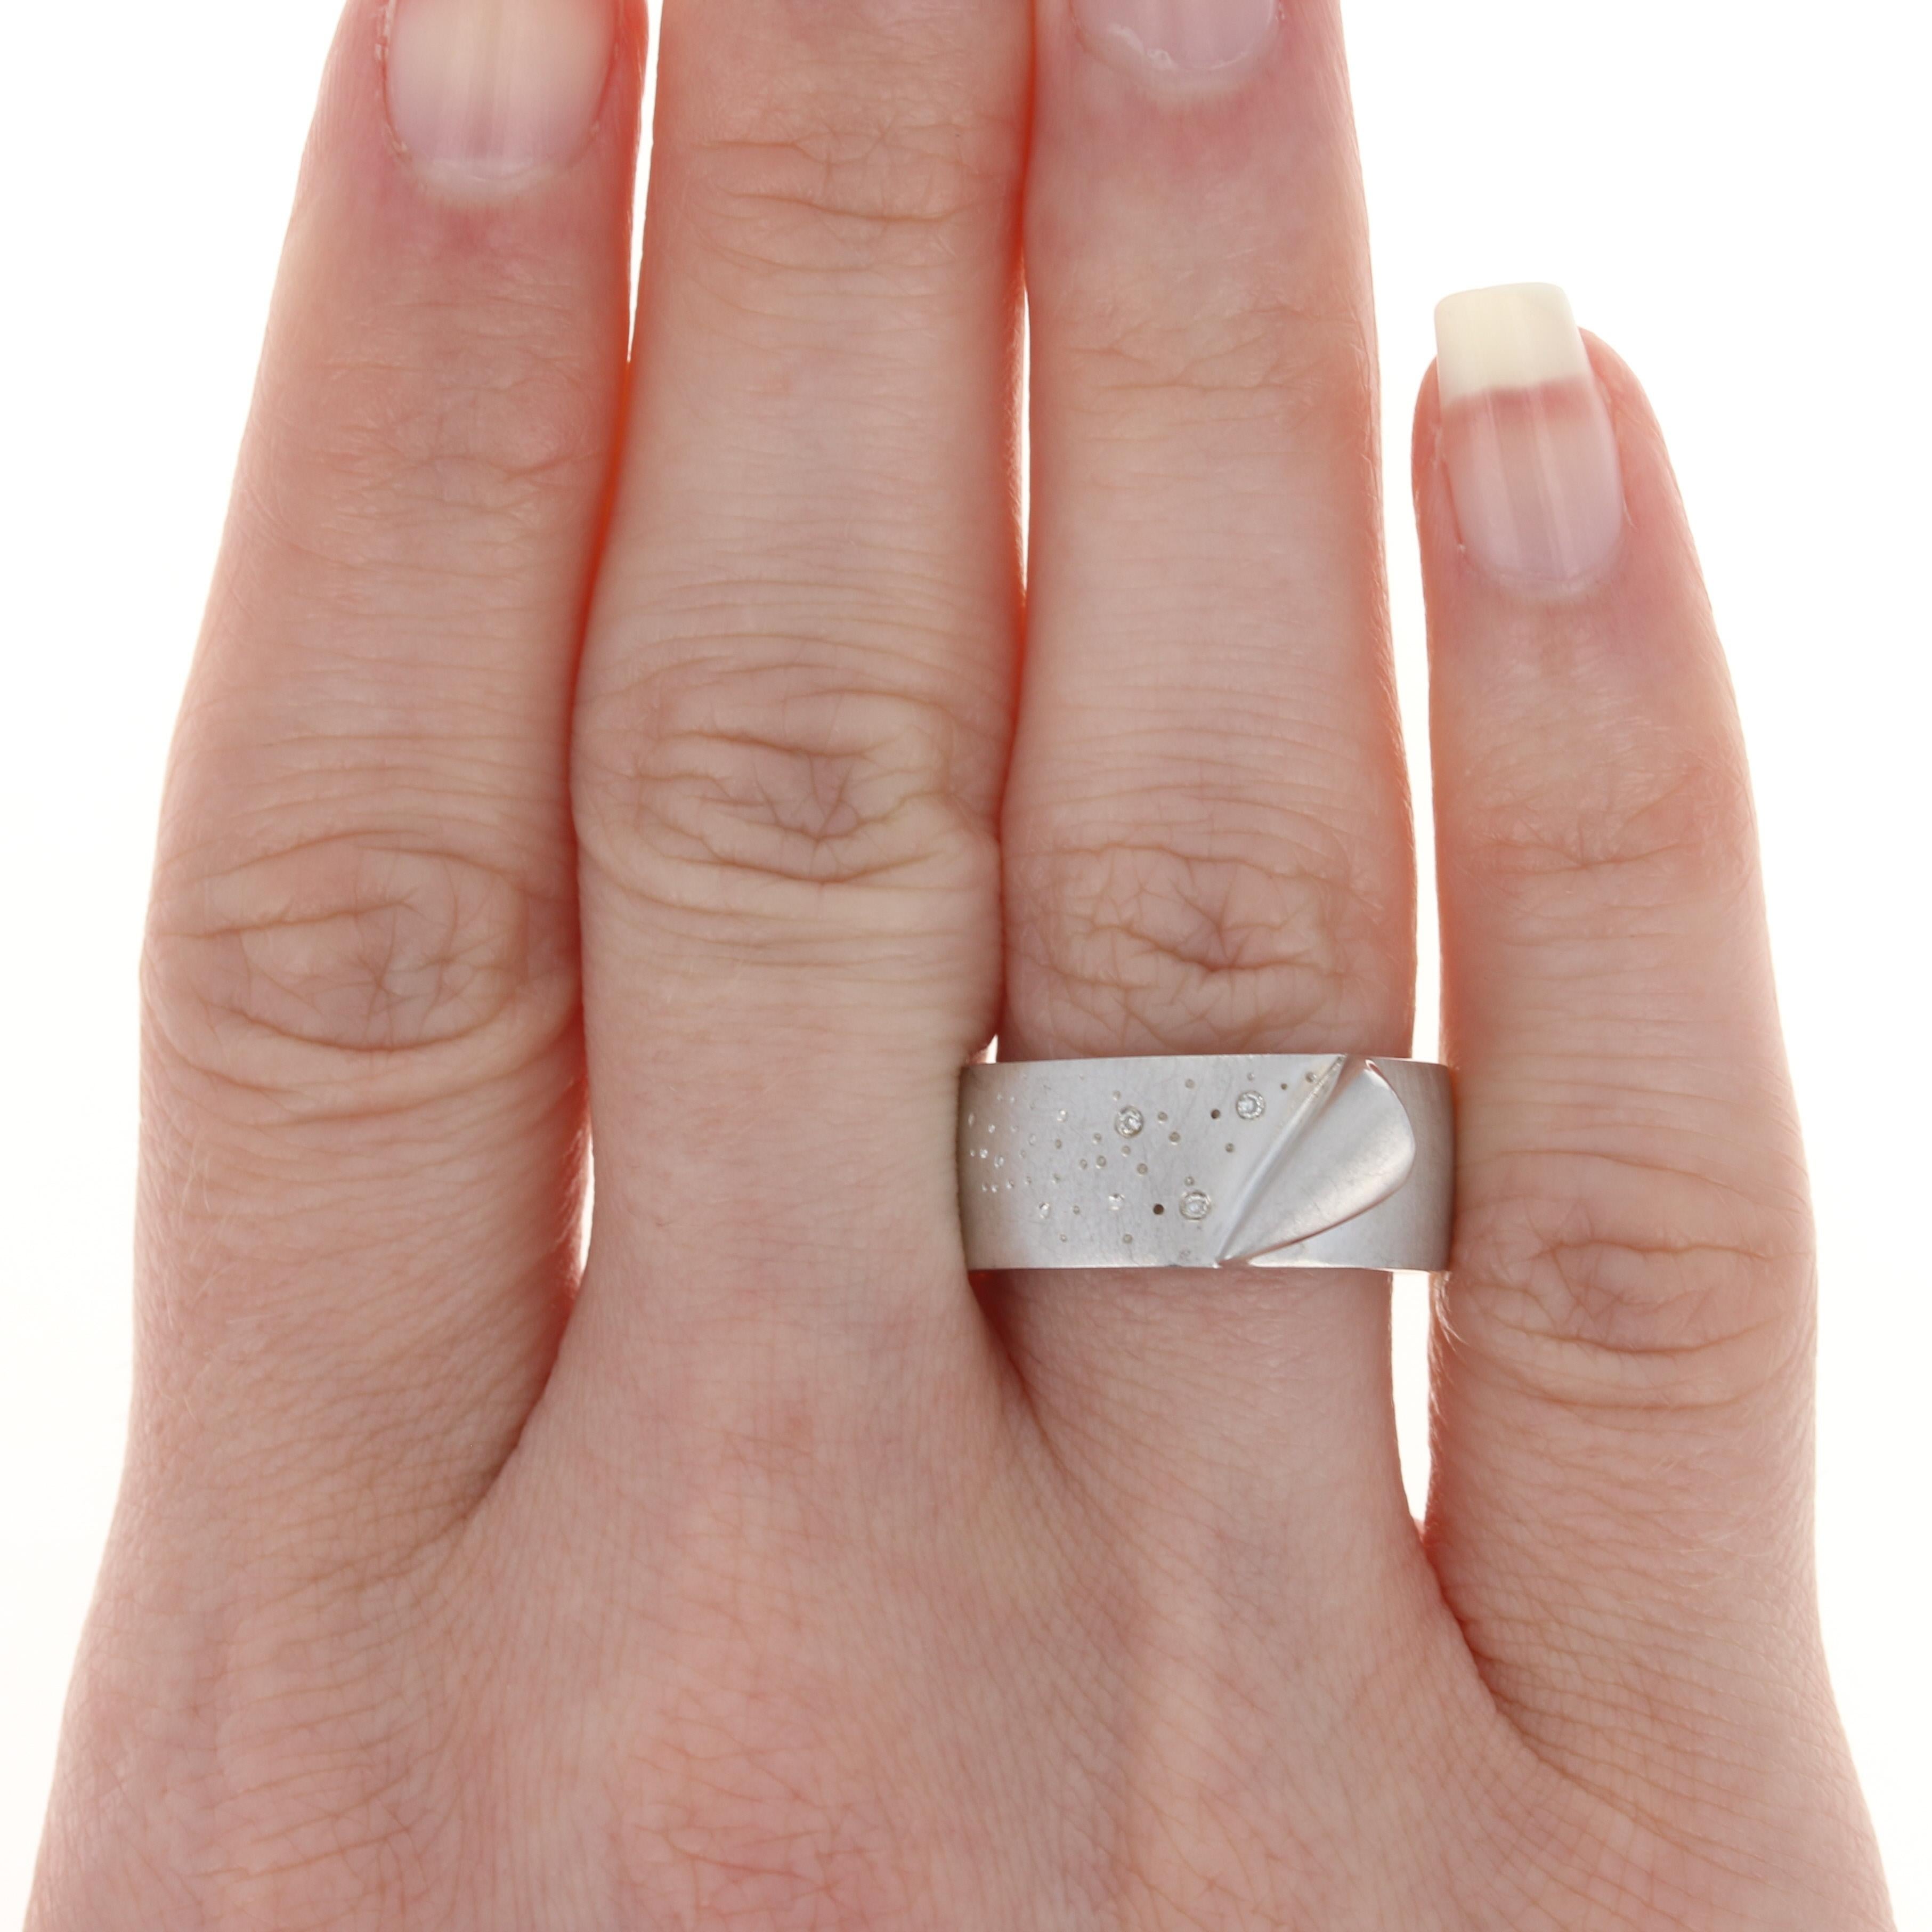 This ring retails at $265 

This ring is a size 7 1/2 - 7 3/4. Please contact for additional sizing options.

Metal Content: Sterling Silver
Finish: Satin

Stone Information:
Natural Diamonds - 
Cut: Round
Total Carats: 0.01ctw 

Face Height (north